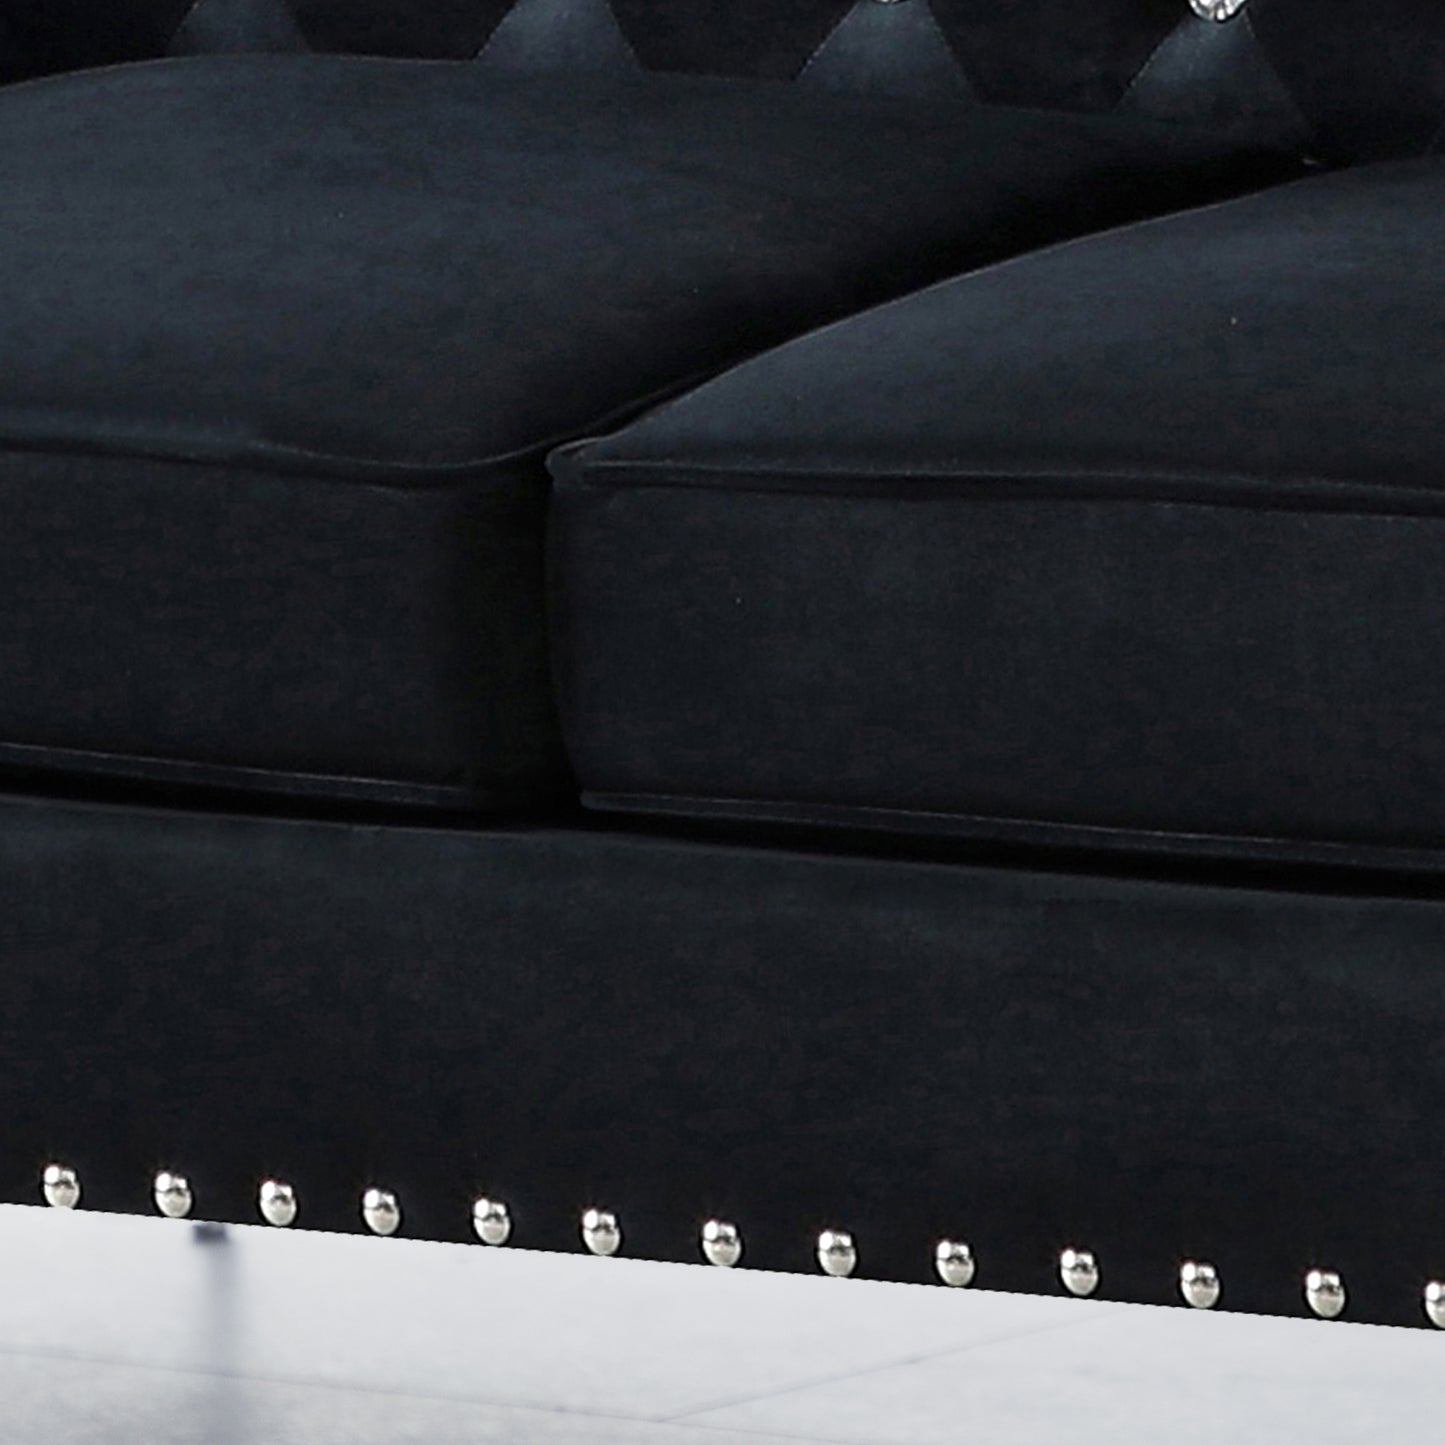 Chesterfield Black Velvet Sofa with Jeweled buttons